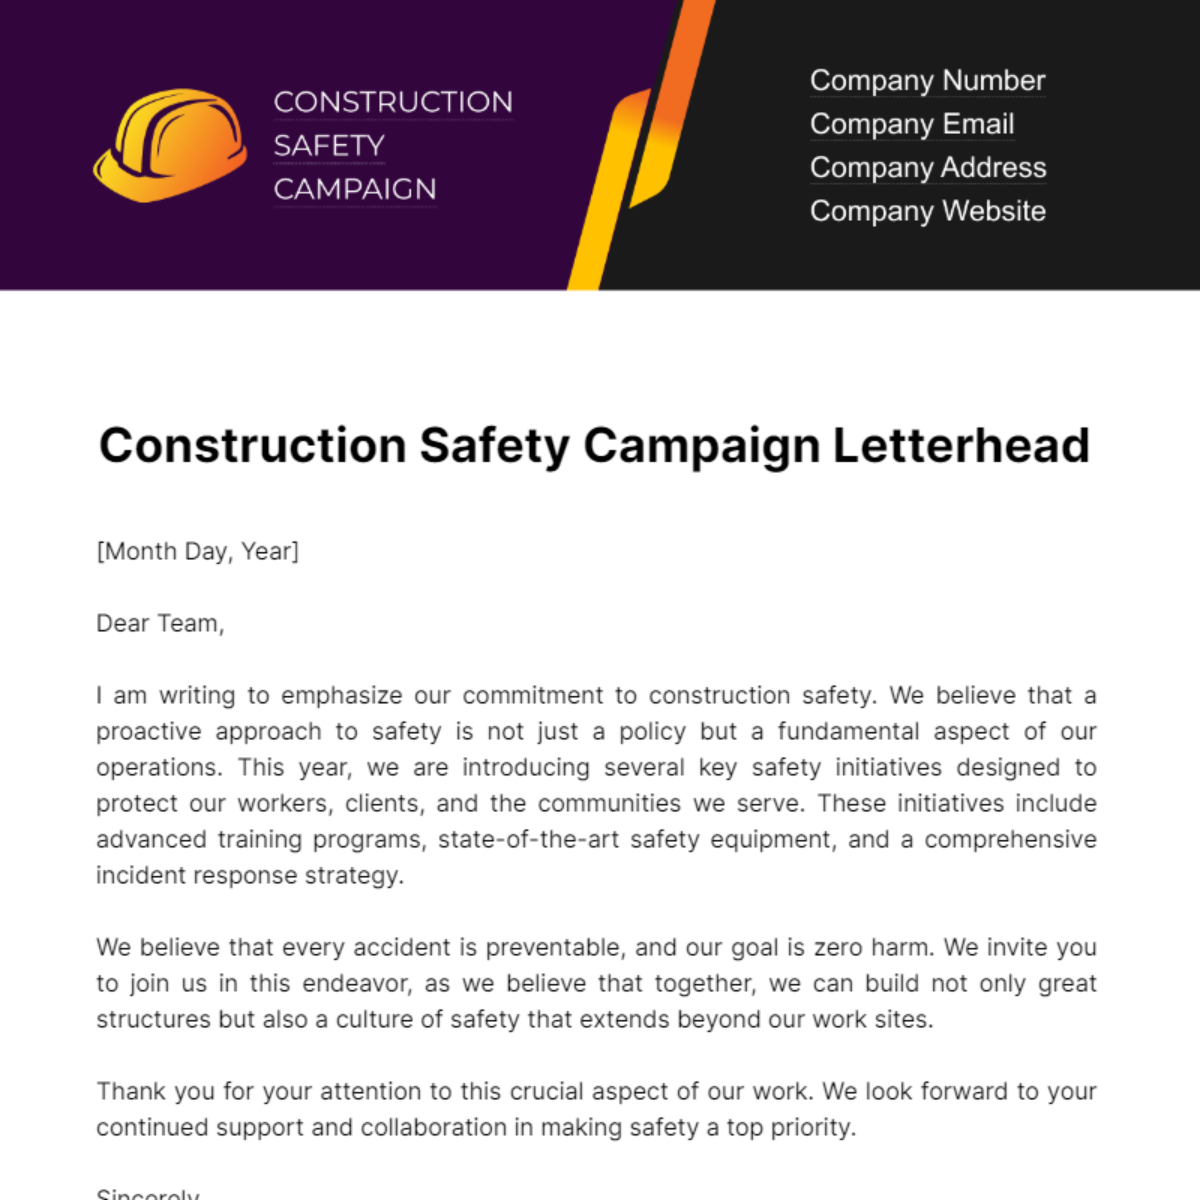 Free Construction Safety Campaign Letterhead Template